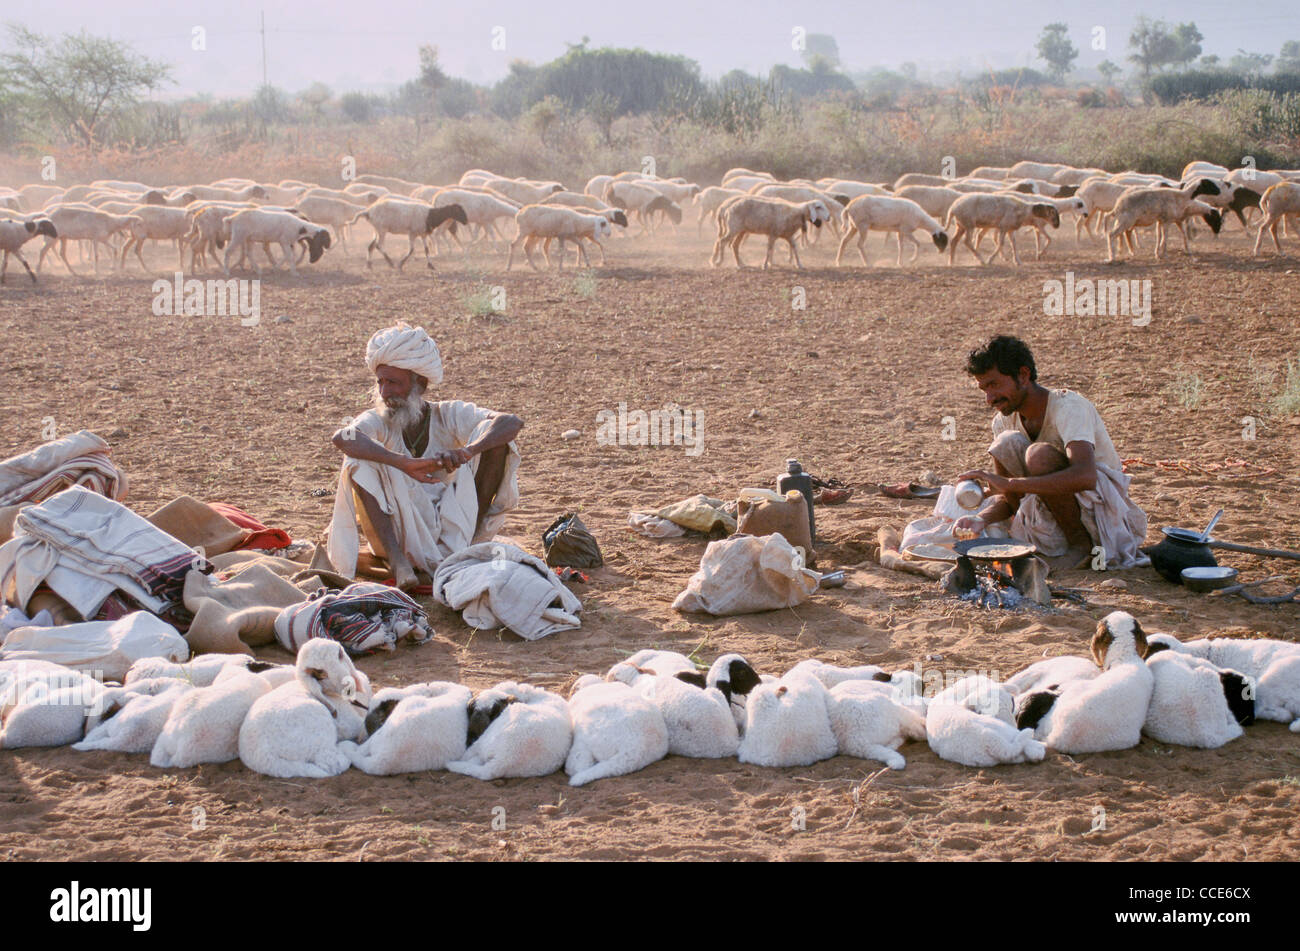 A herdsman is cooking bread  ( 'roti', the local bread) while his companion is keeping an eye on their flock ( India) Stock Photo